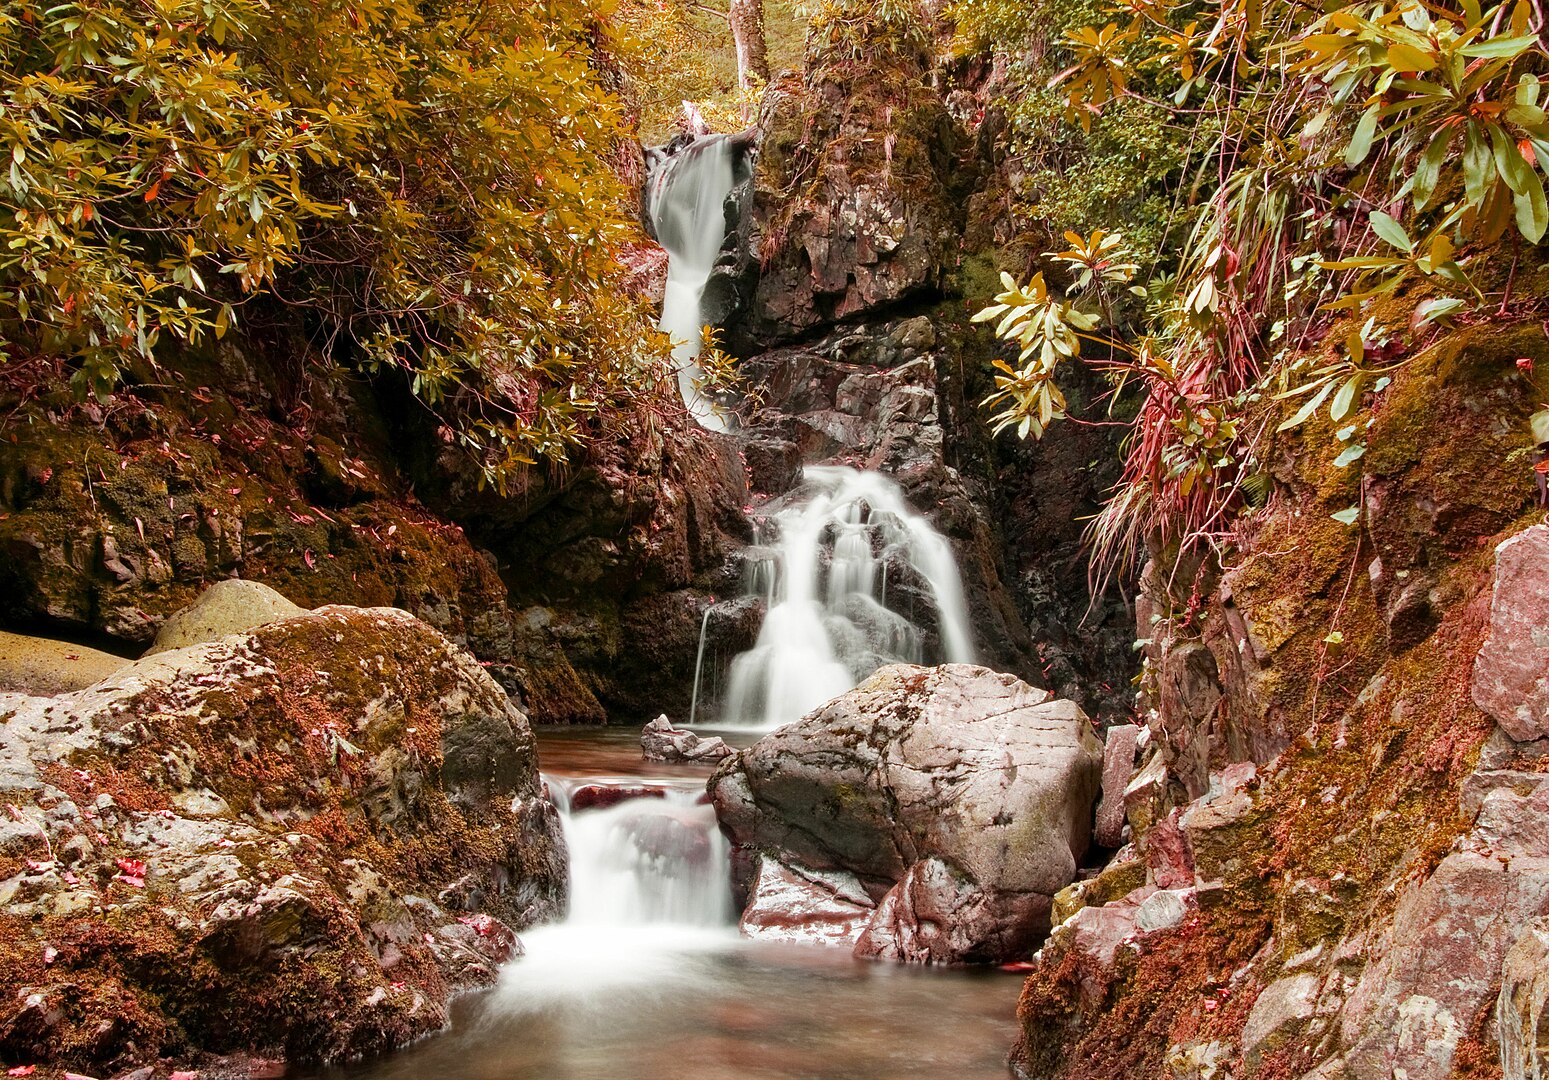 Photograph of a waterfall and autumn trees in Tollymore Forest Park.